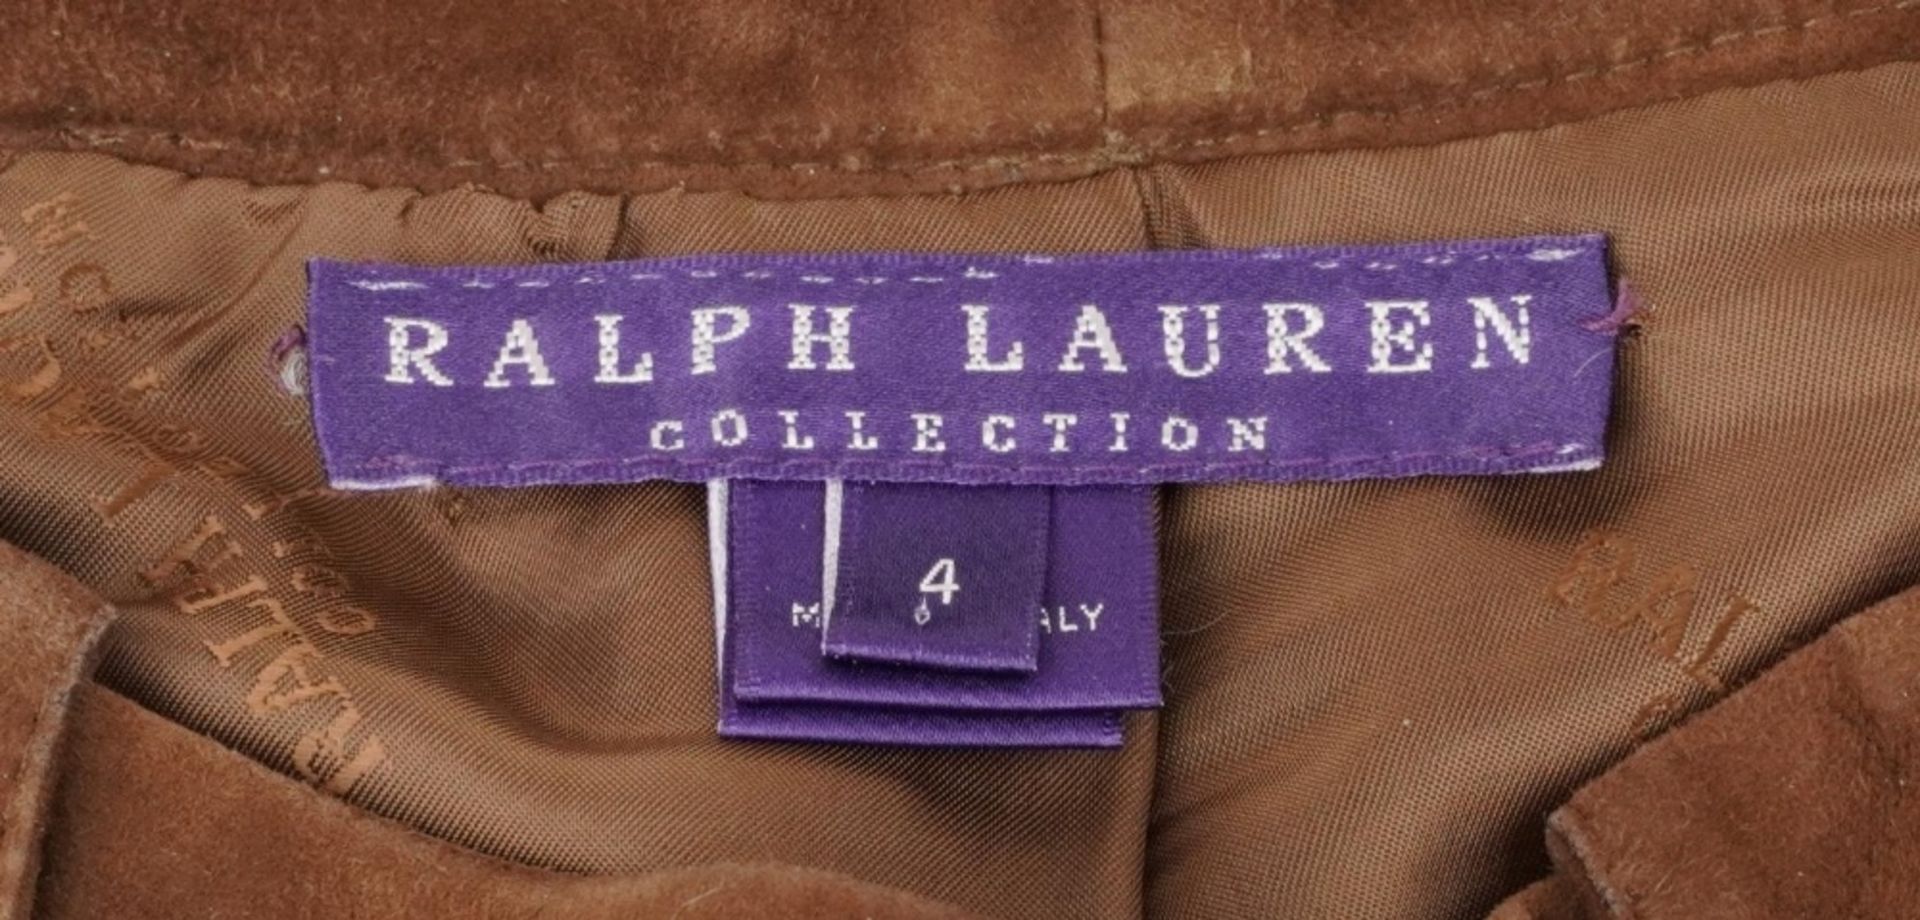 Pair of Ralph Lauren suede trousers, size 4 and Giorgio Armani blazer, size 40 : For further - Image 2 of 4